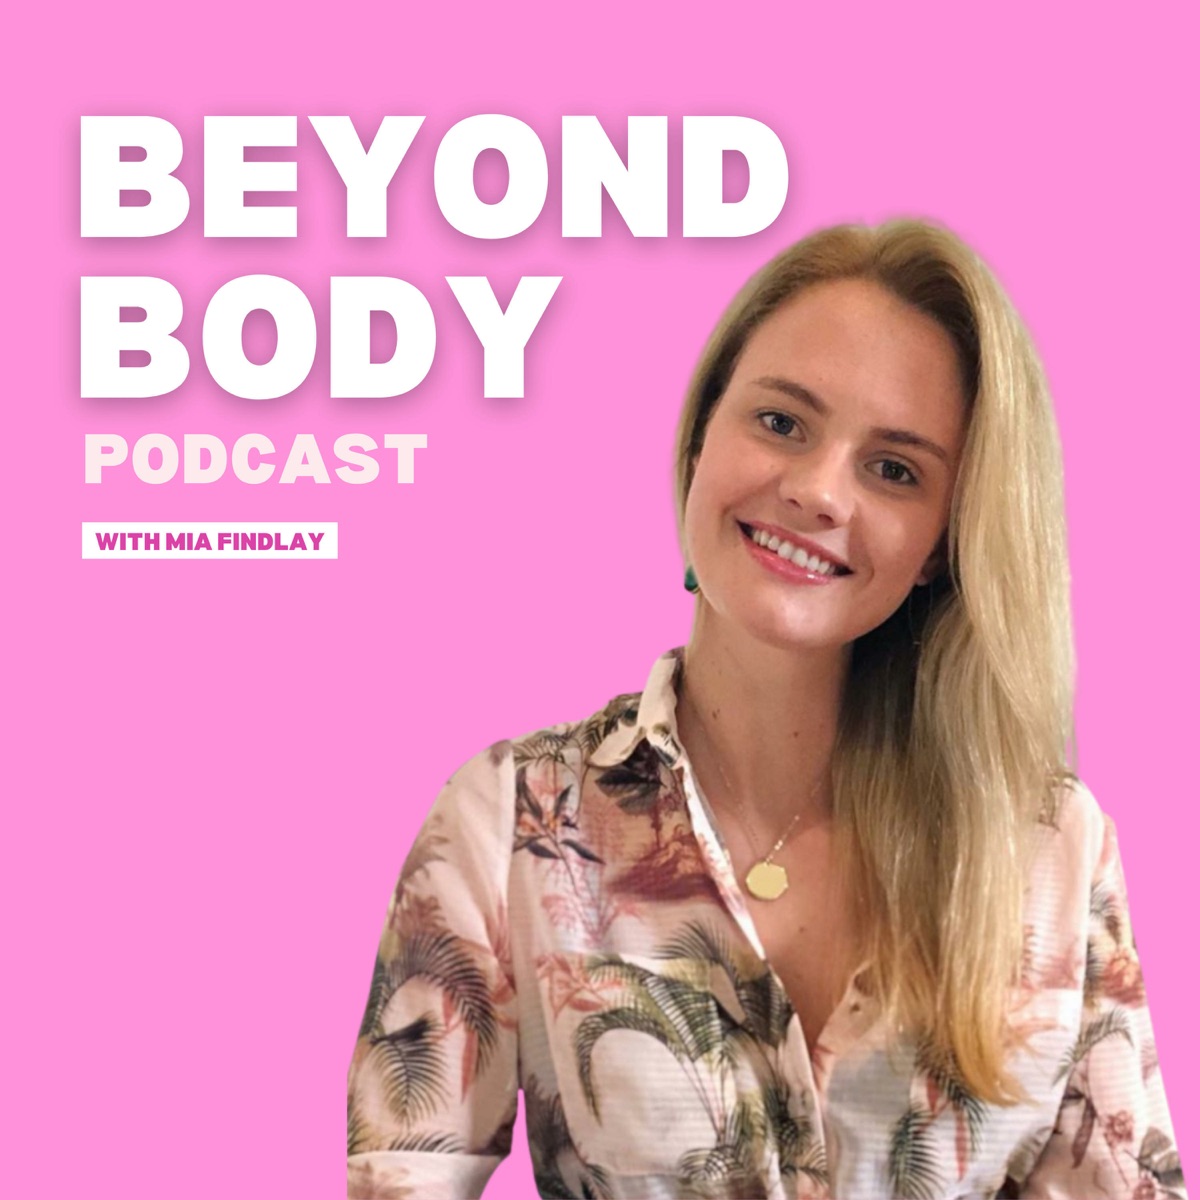 Beyond Body Podcast cover image